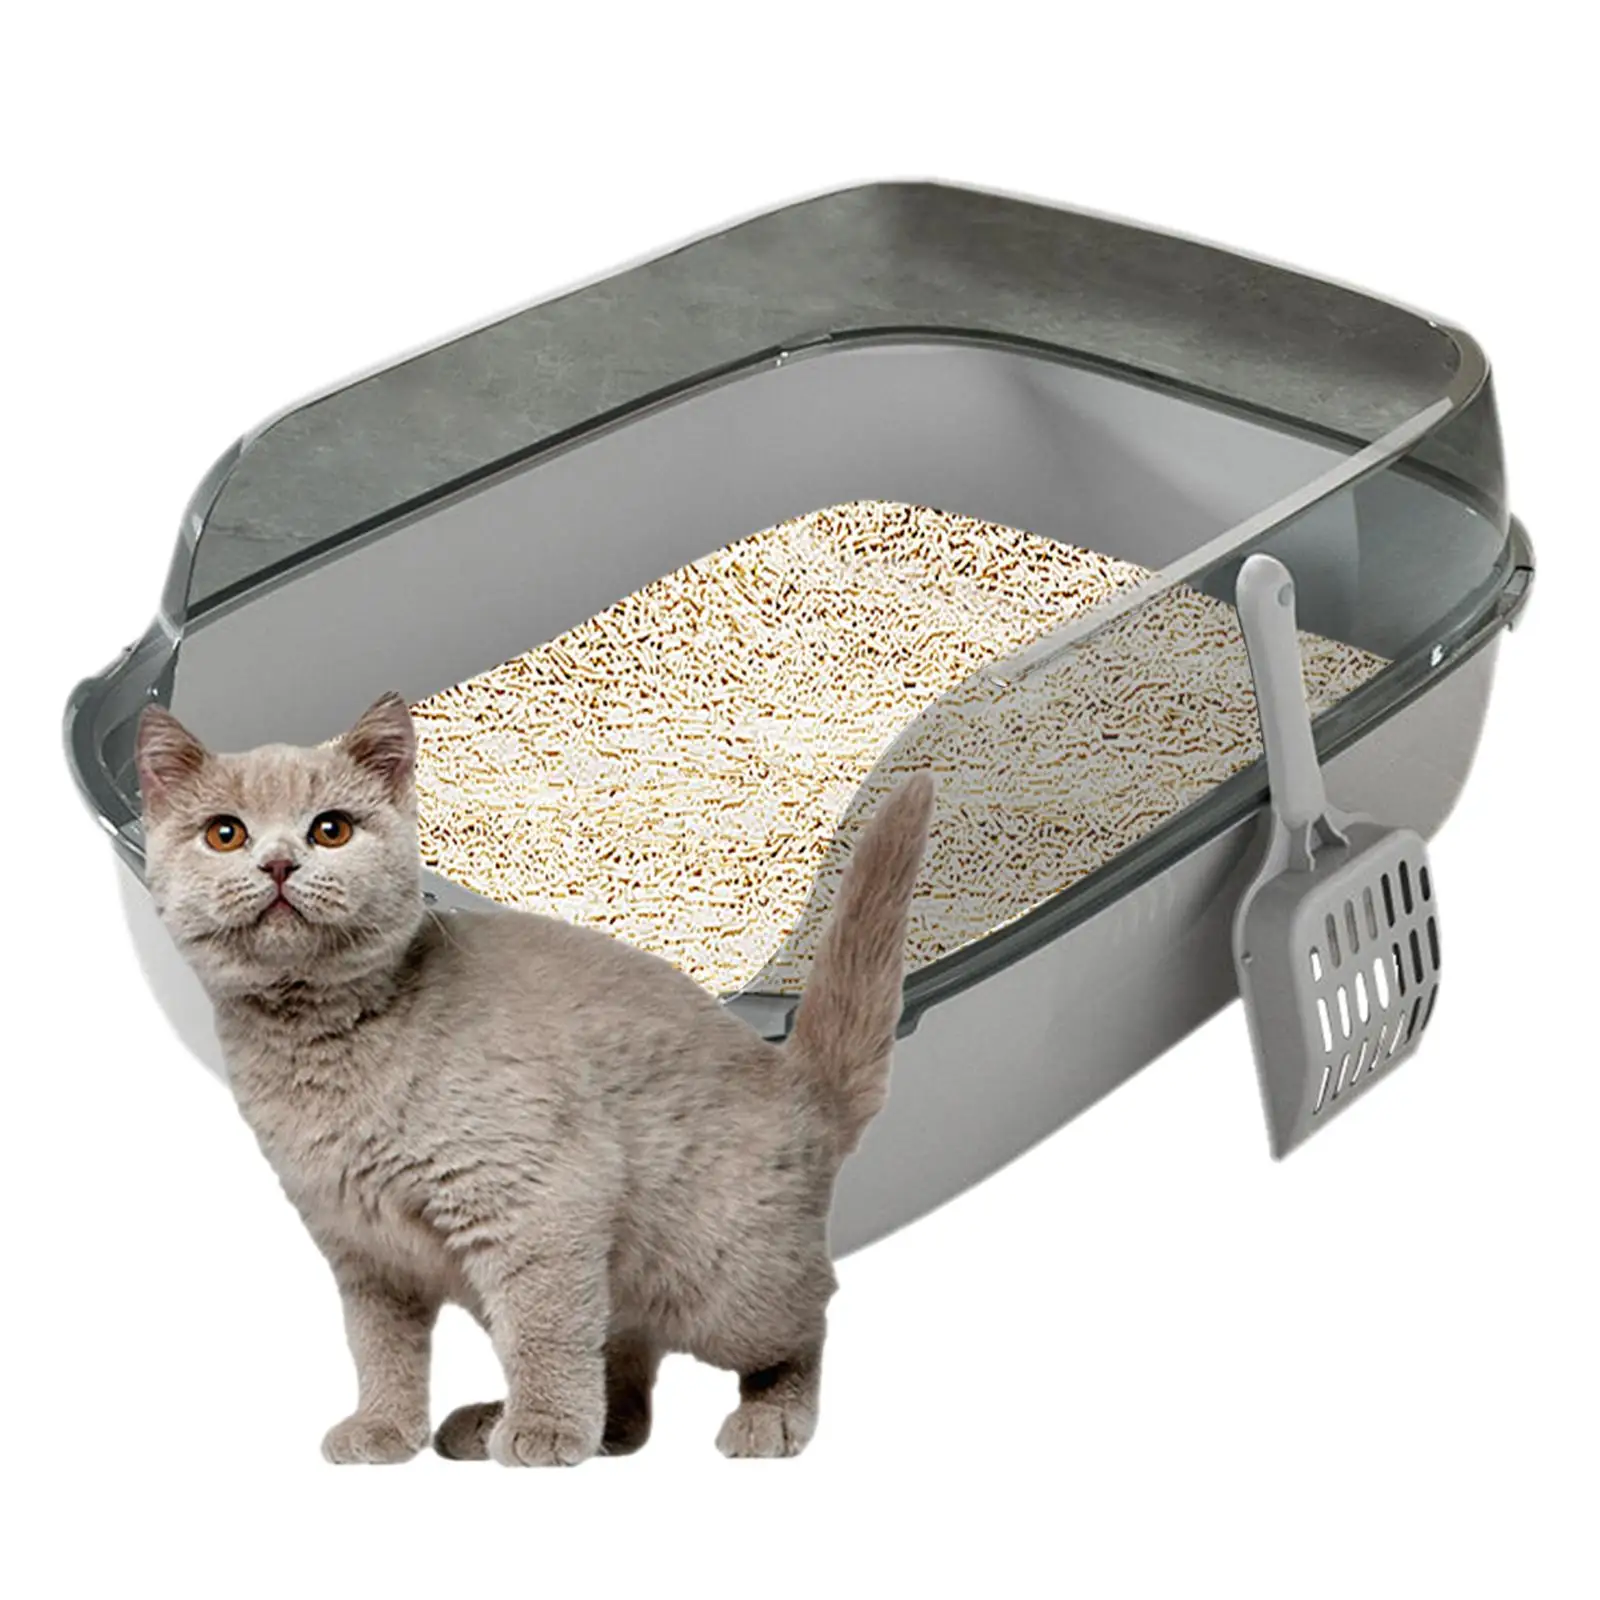 Cat Litter Box Semi Enclosed Easy to Clean Plastic Sturdy Large Detachable Tall Spray Shield Kitty Litter Open Top Cat Kitty